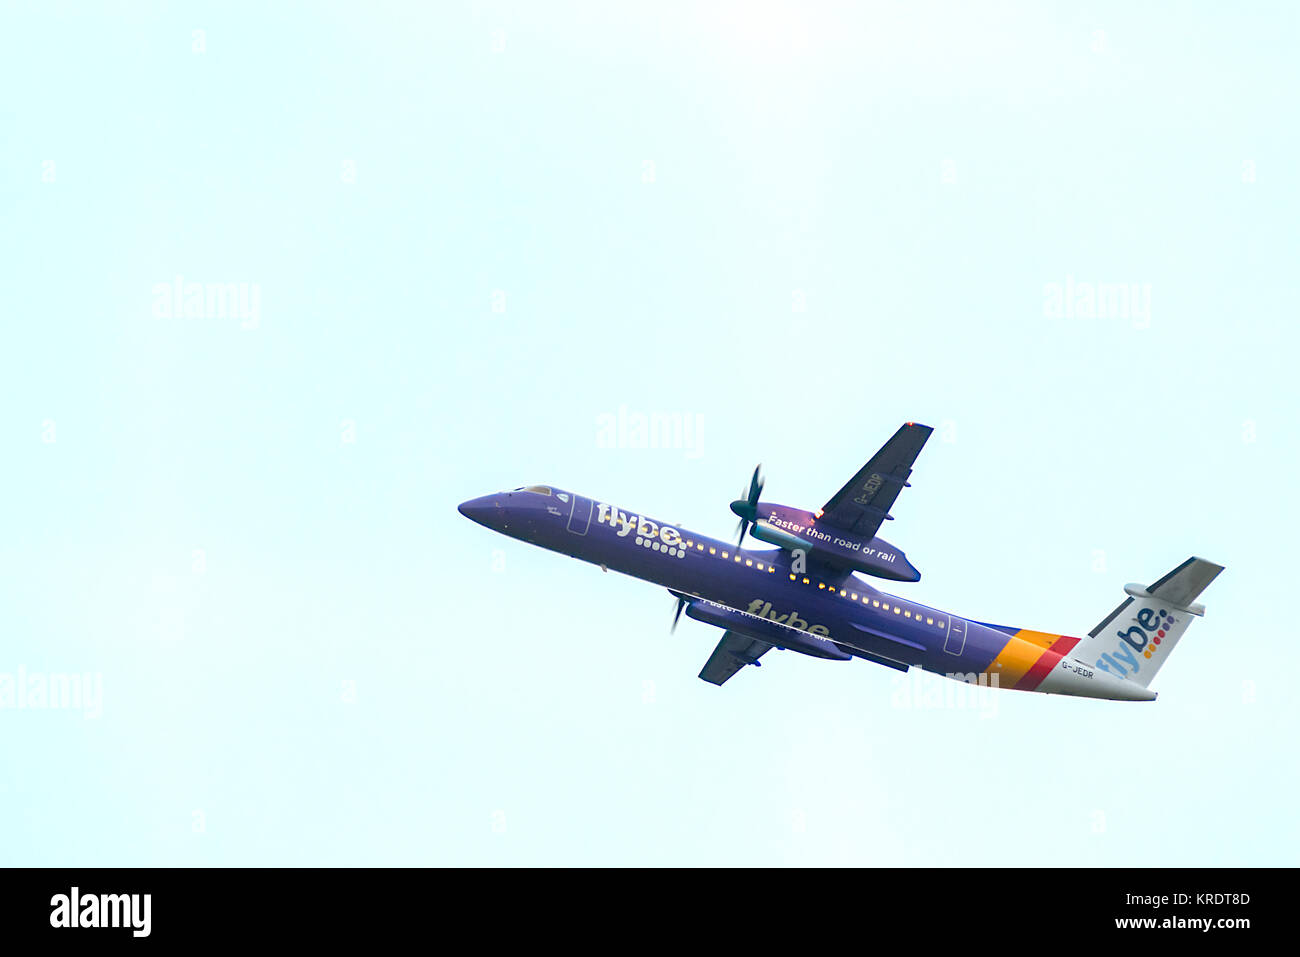 Flybe passenger airplane G-JEDR Bombardier Dash 8 Q400 flying over head after take off. Stock Photo